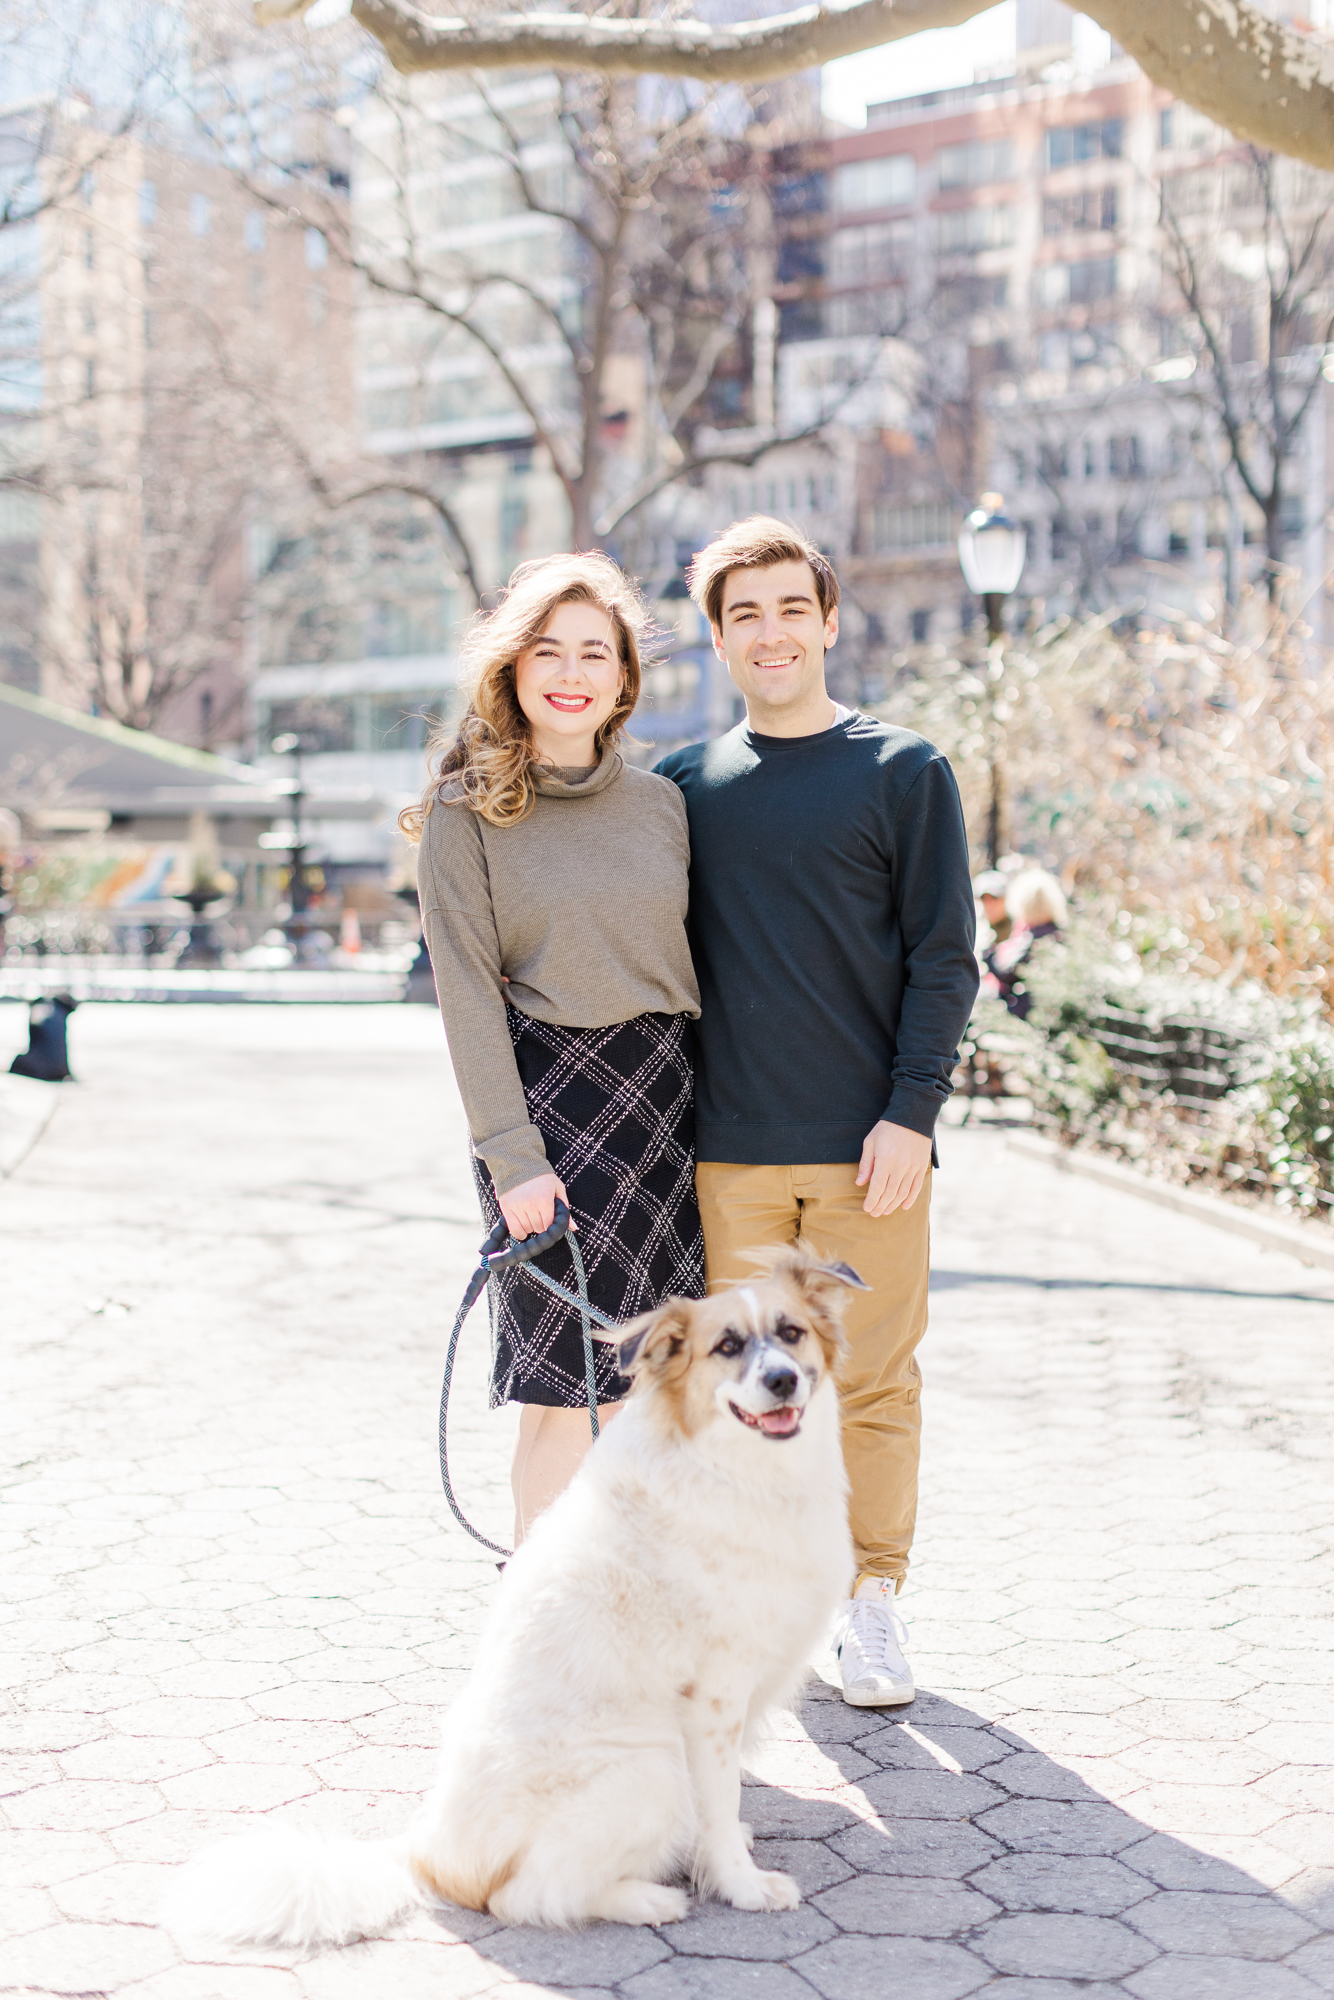 Gorgeous Engagement Photos in Wintery Madison Square Park